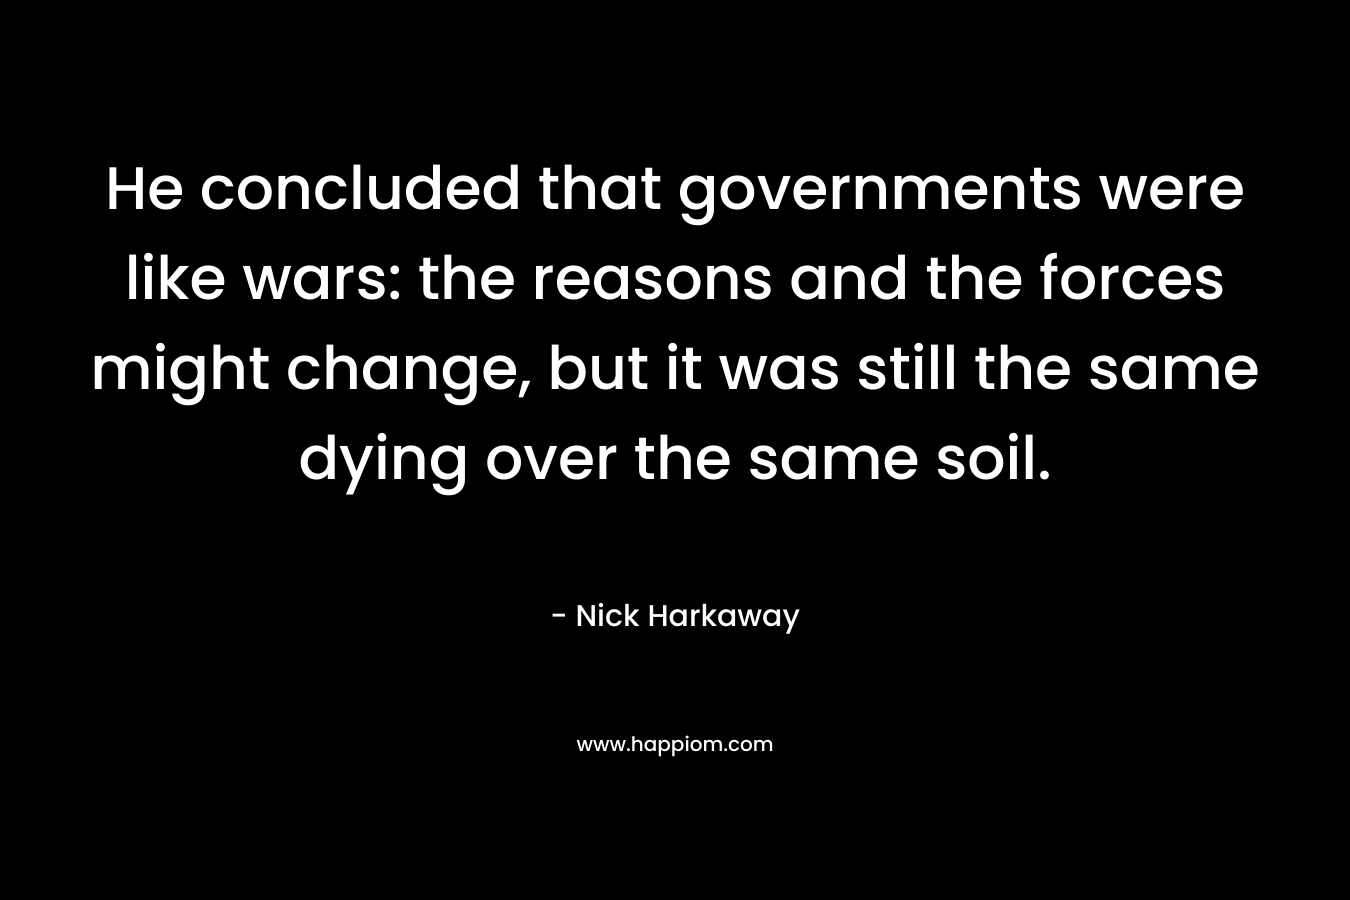 He concluded that governments were like wars: the reasons and the forces might change, but it was still the same dying over the same soil. – Nick Harkaway